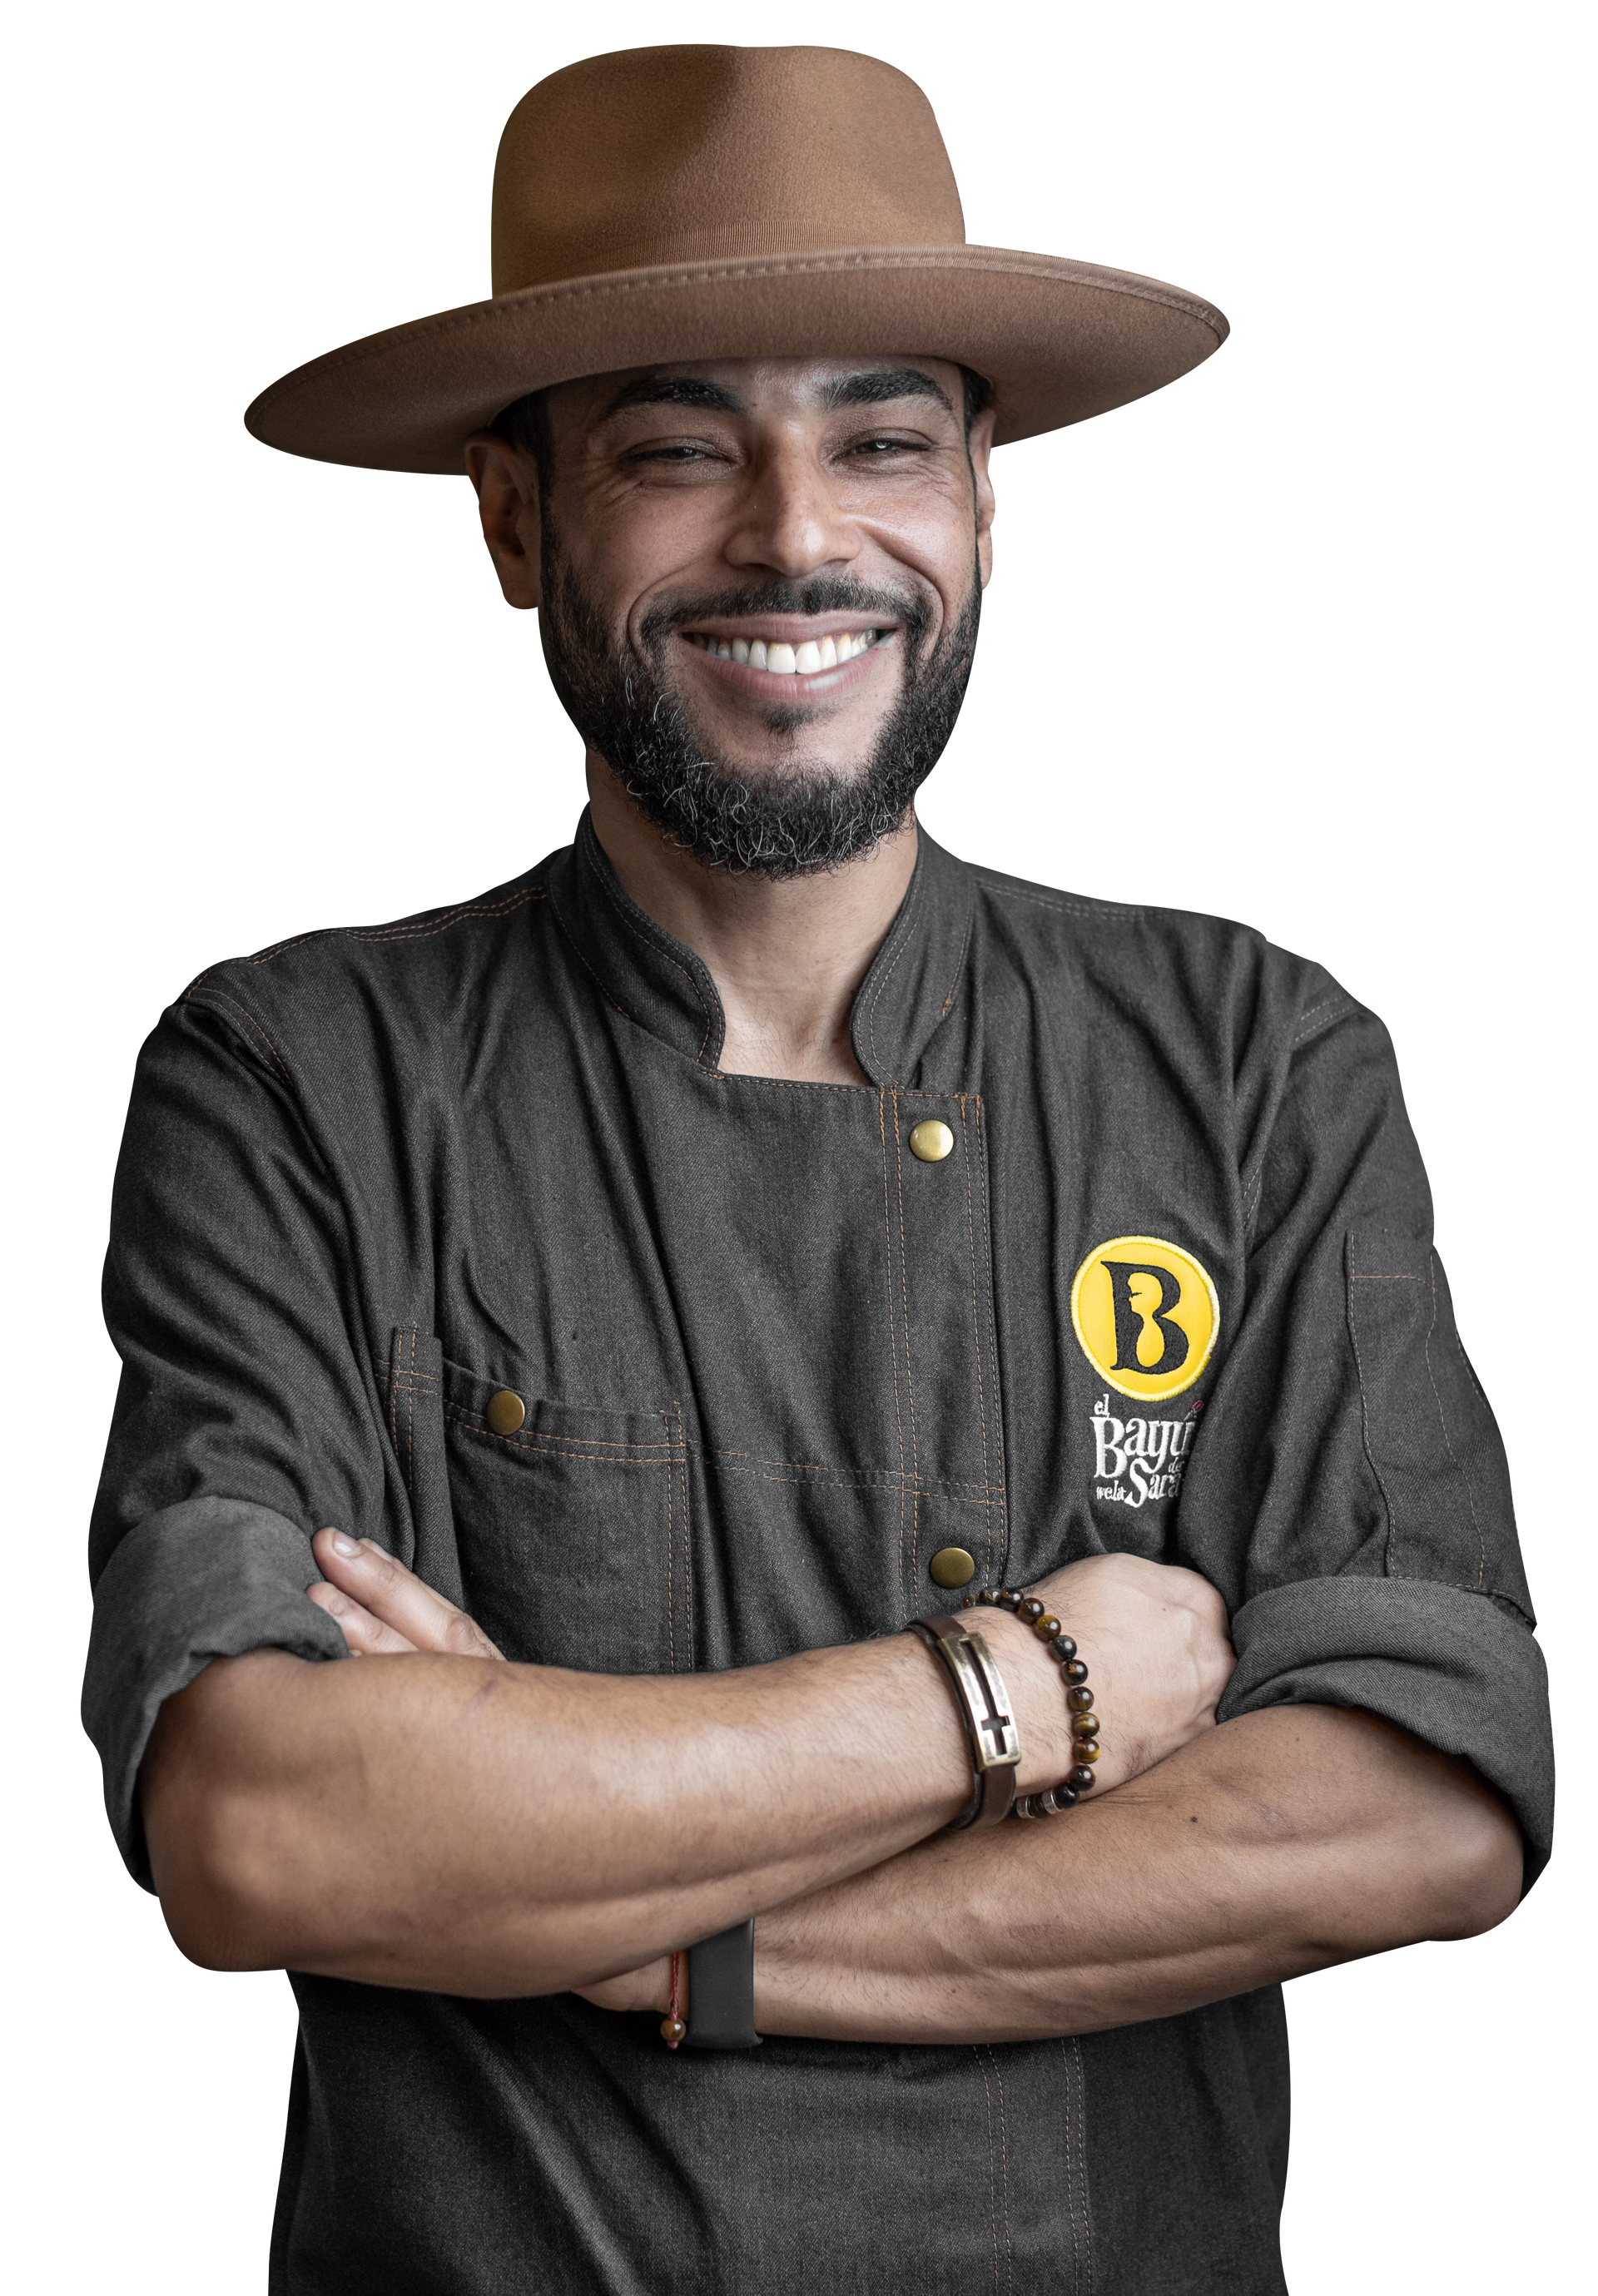 chef iram wearing a hat and a chef 's coat is smiling with his arms crossed .